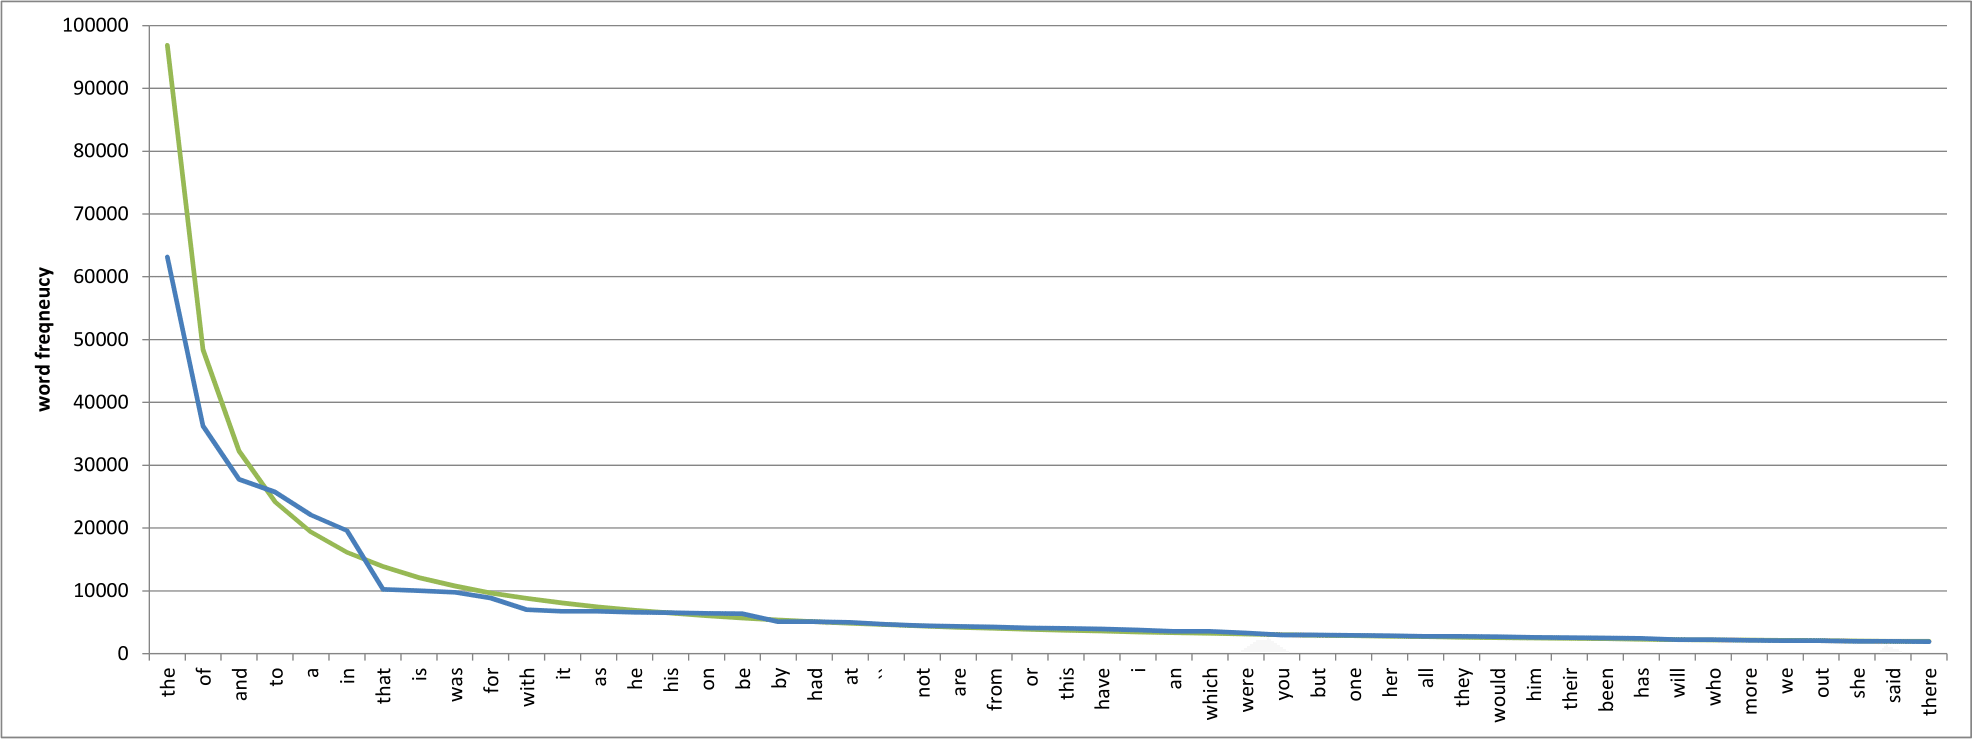 Word counts (blue) in the Brown Corpus, ordered from most to least common. Also shown are the expected word counts according to Zipf's Law (green).